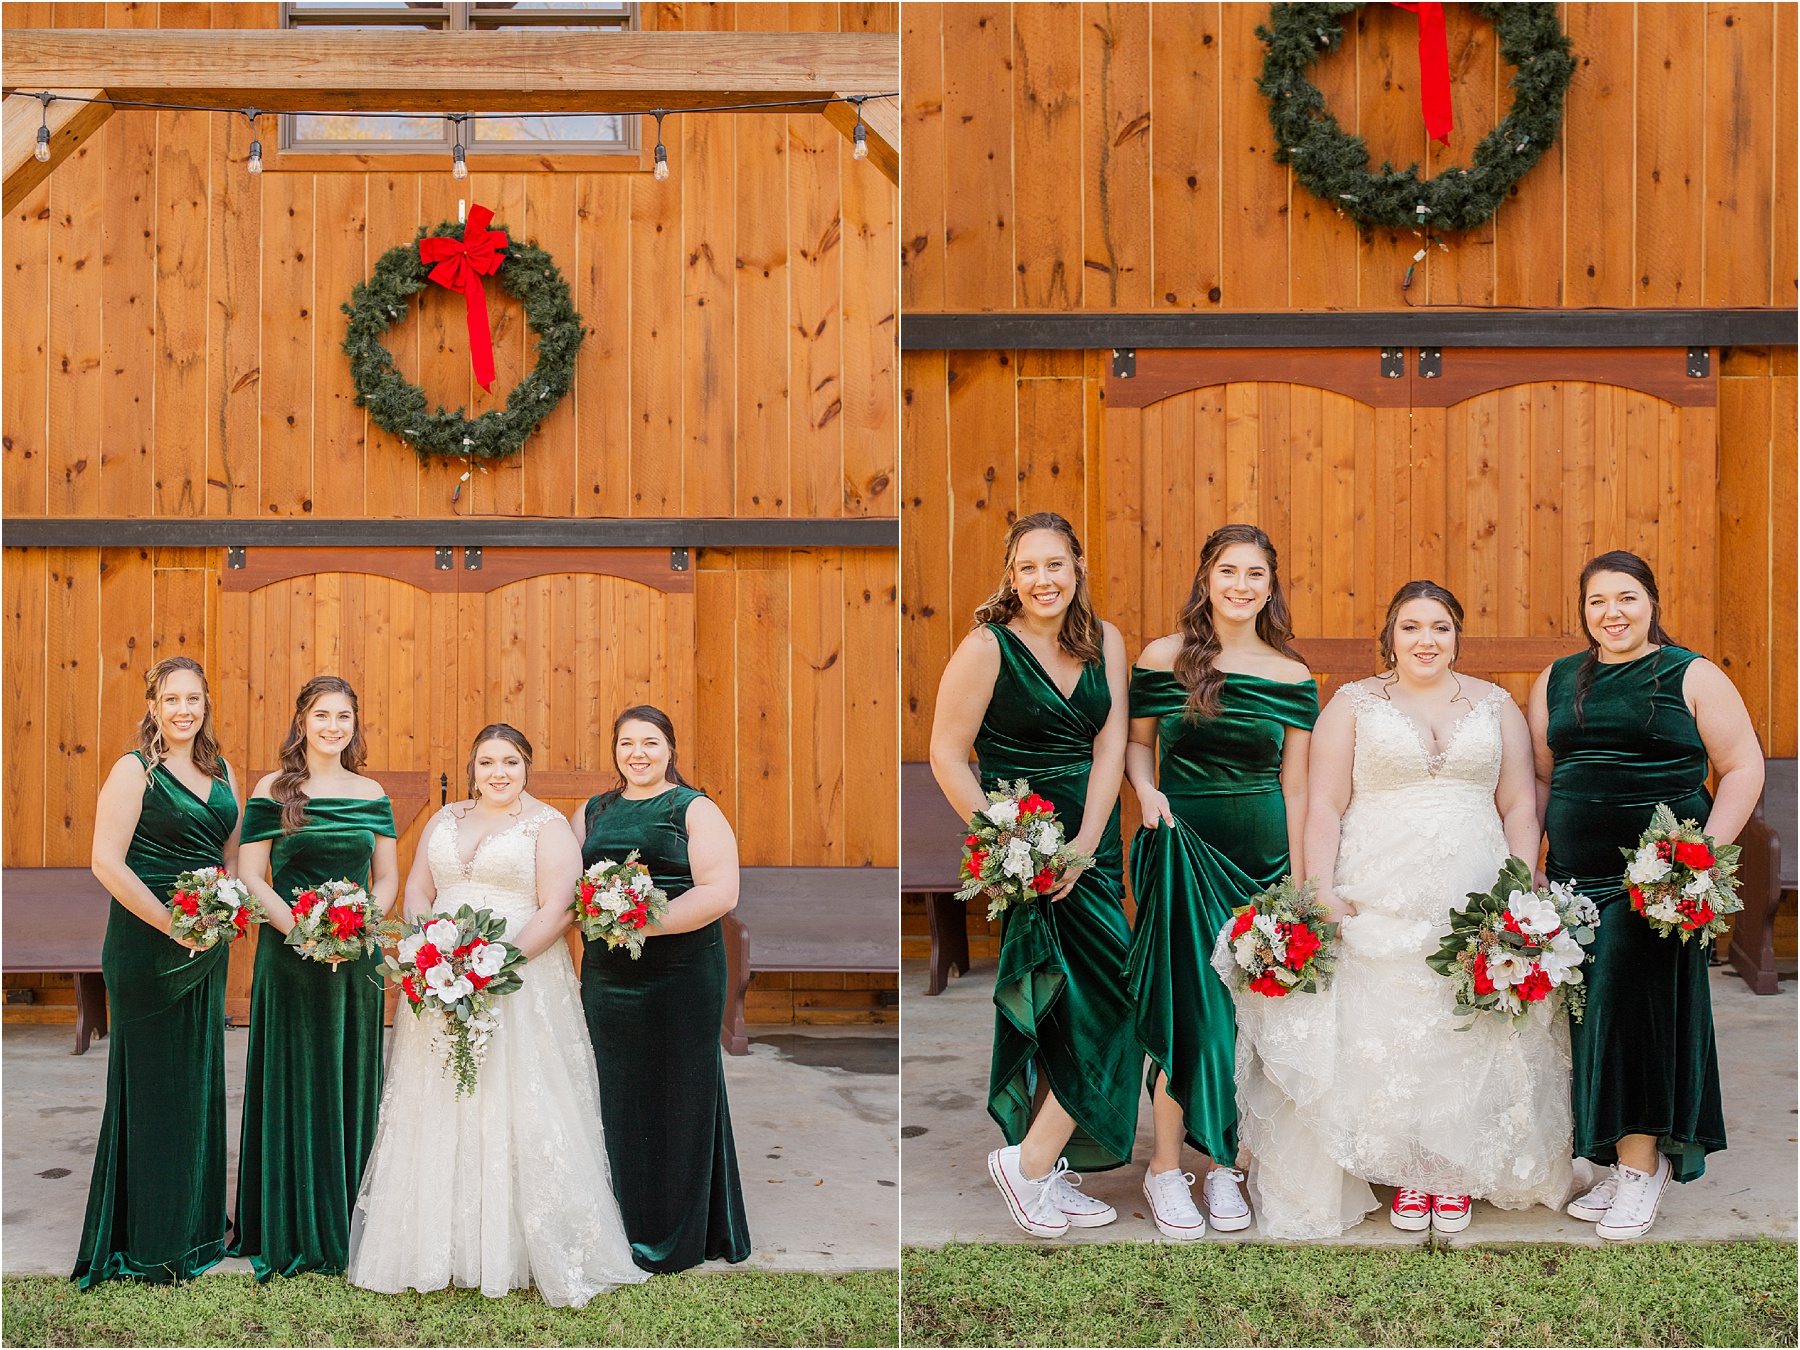 bride and bridesmaids showing off tennis shoes under dress